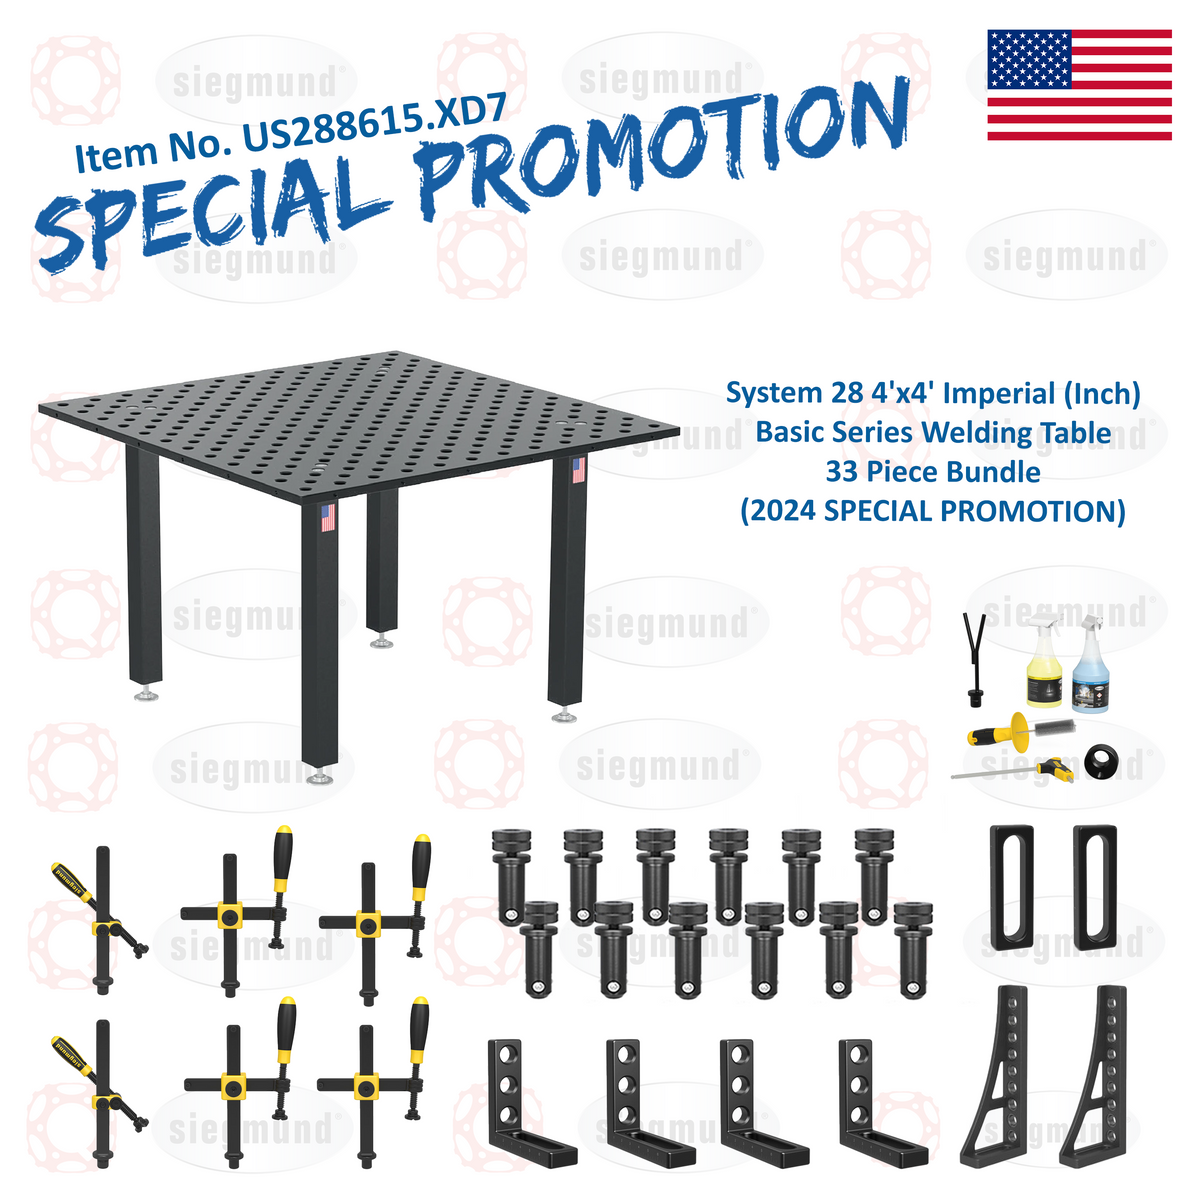 US288615.XD7: System 28 4'x4' (48"x48") Imperial "BASIC" Series (Inch) Welding Table 33 Piece Bundle (2024 SPECIAL PROMOTION)